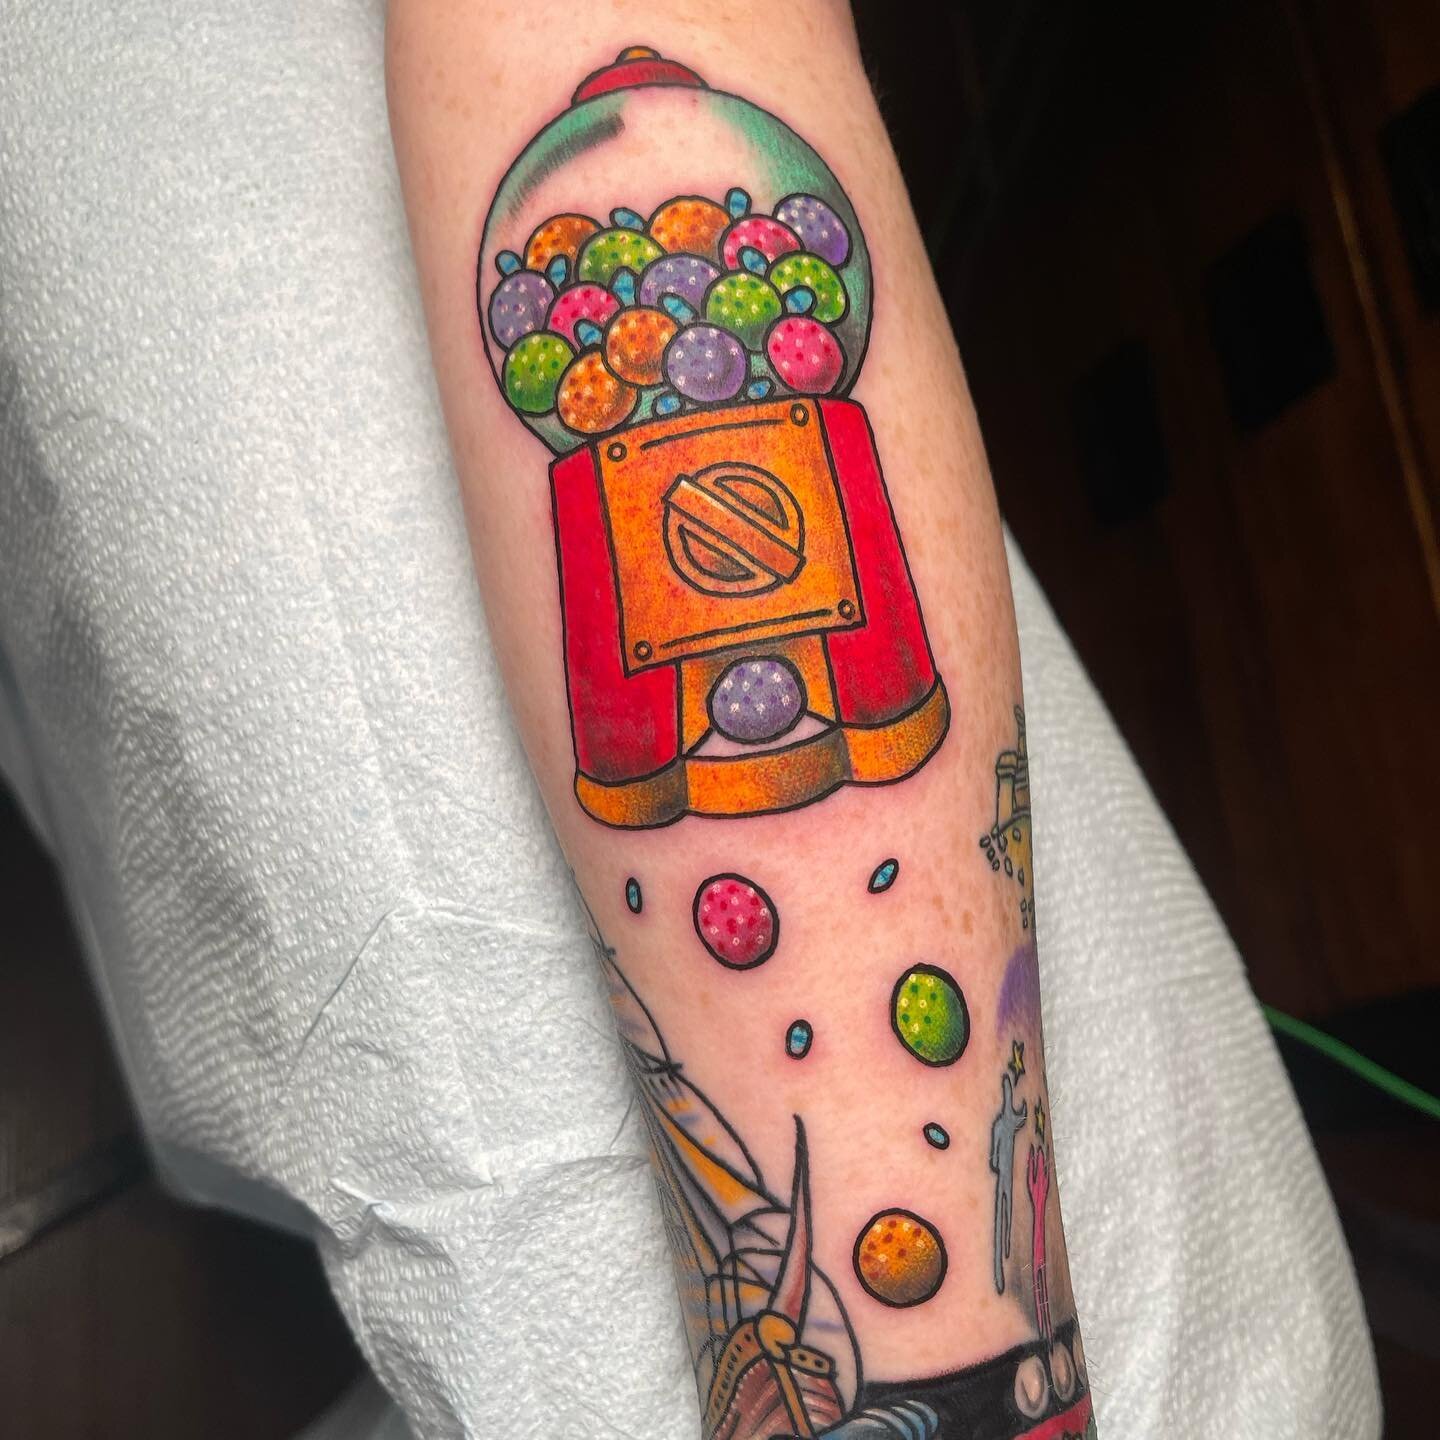 Candy and pills 💊 🍭 
Thank you for the trust!✨
Books never closed💥
Link in bio for booking🐐